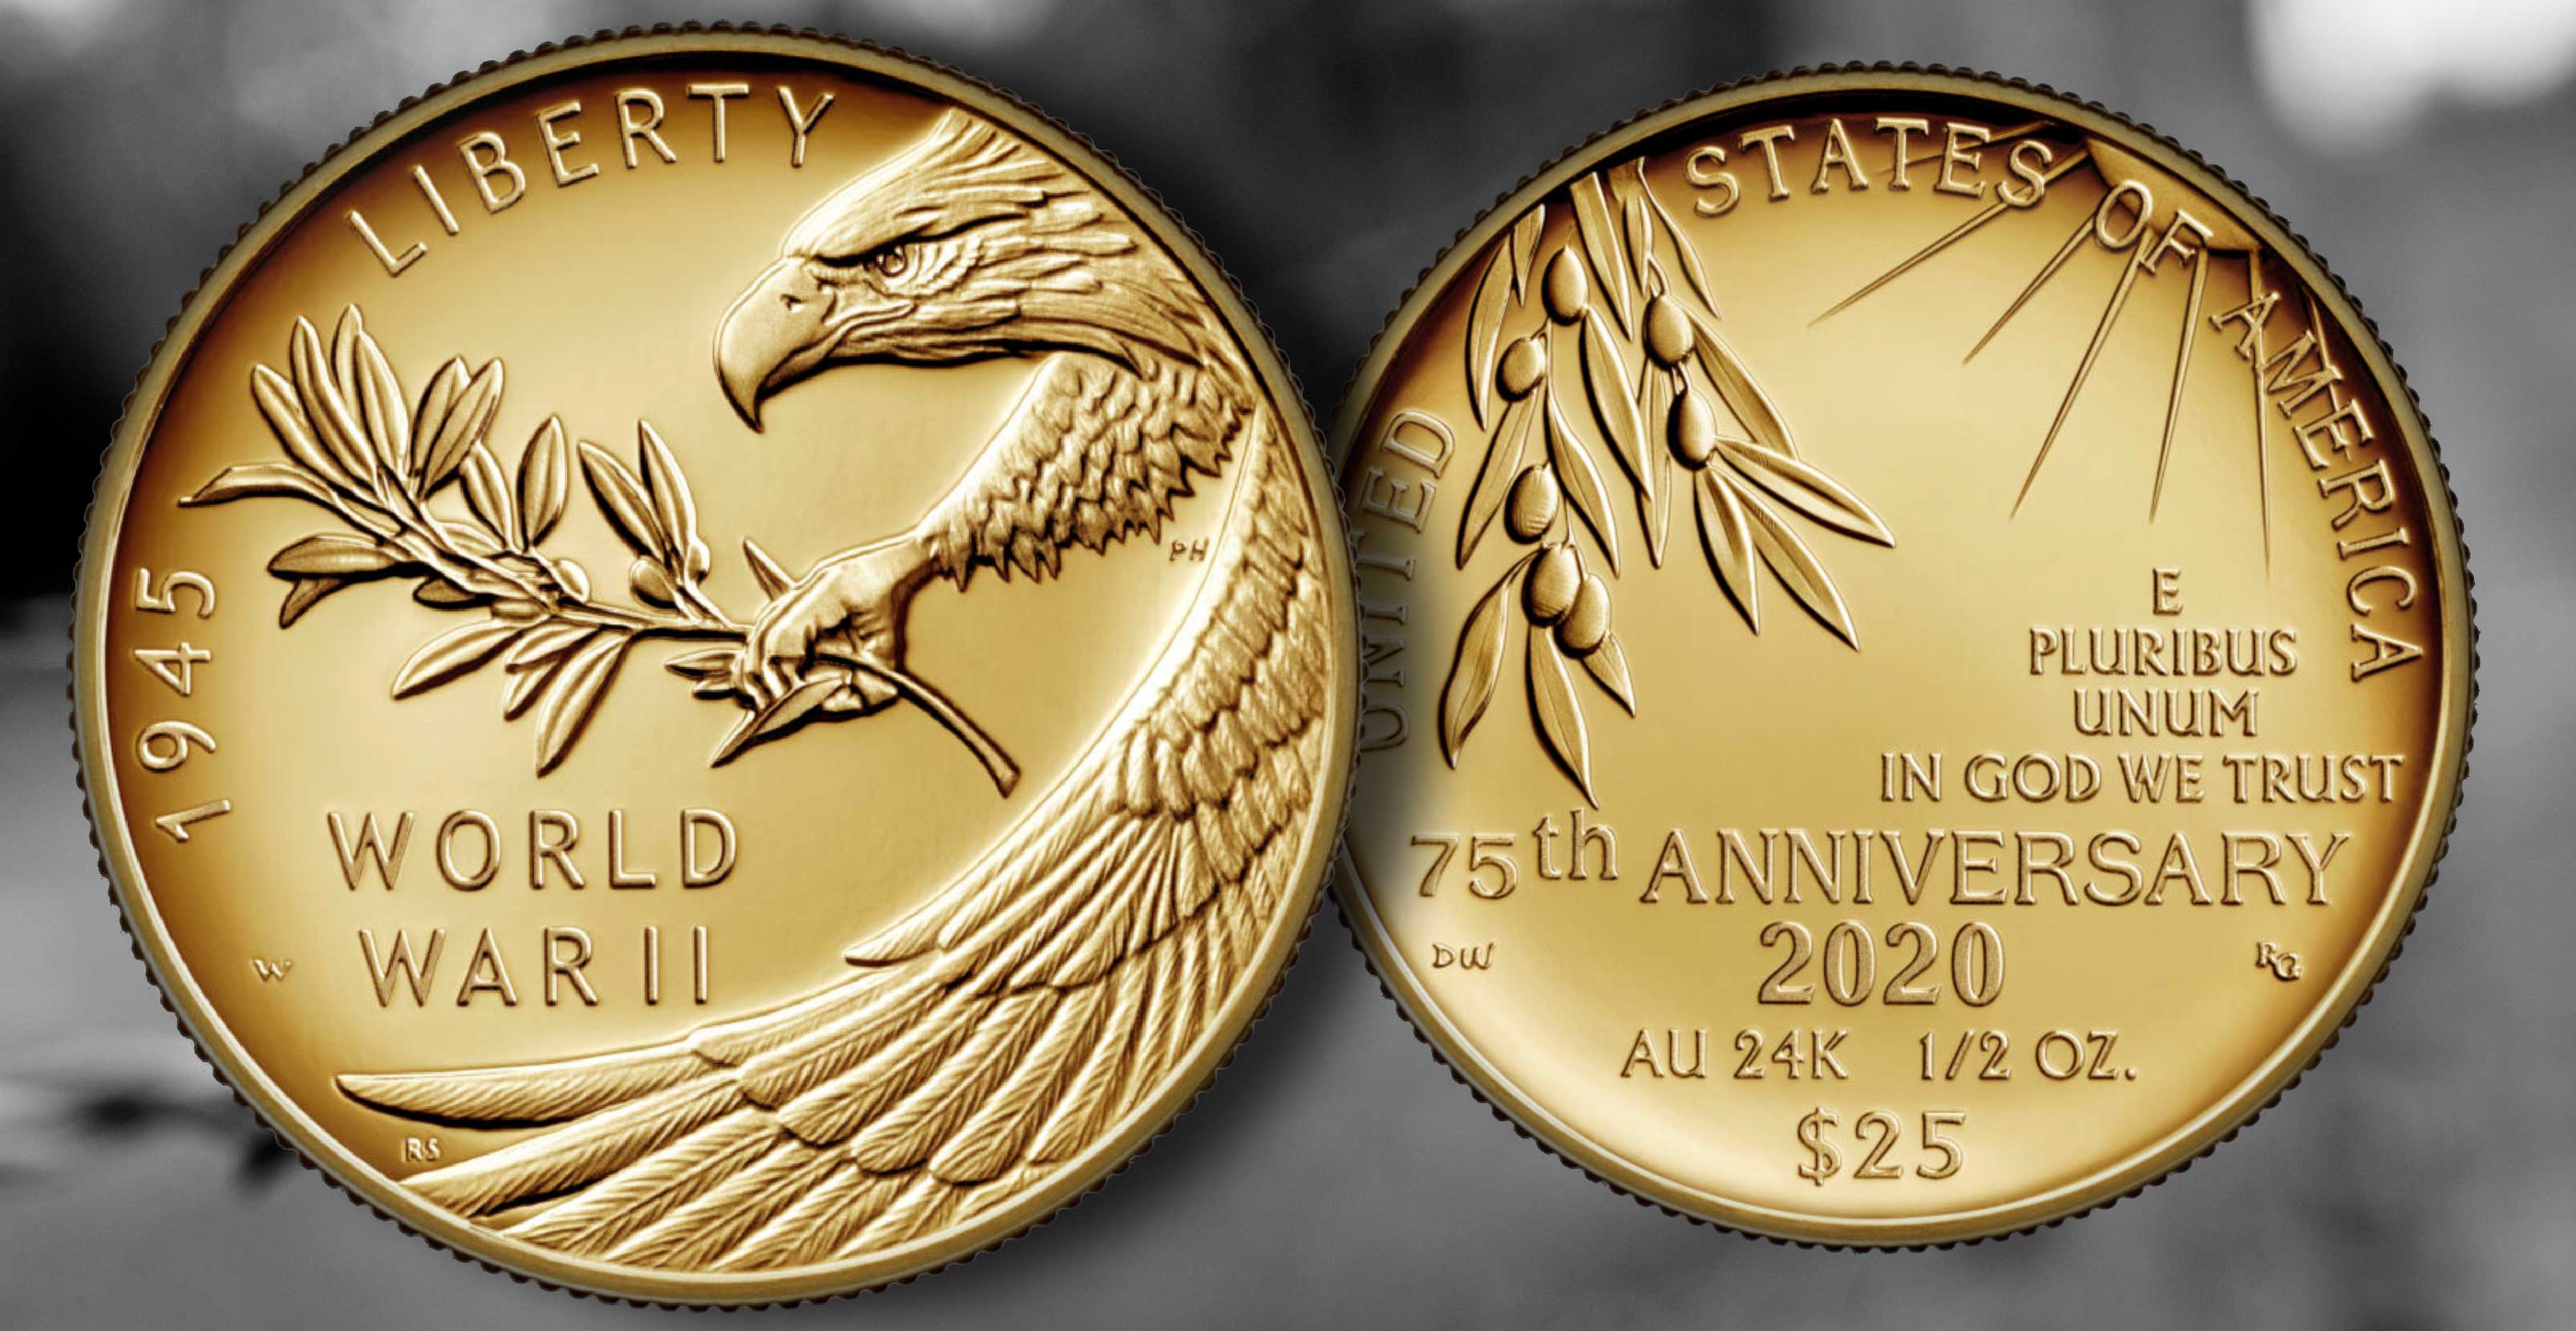 World War II 75th Anniversary Coin, Medal Designs Announced by US Mint